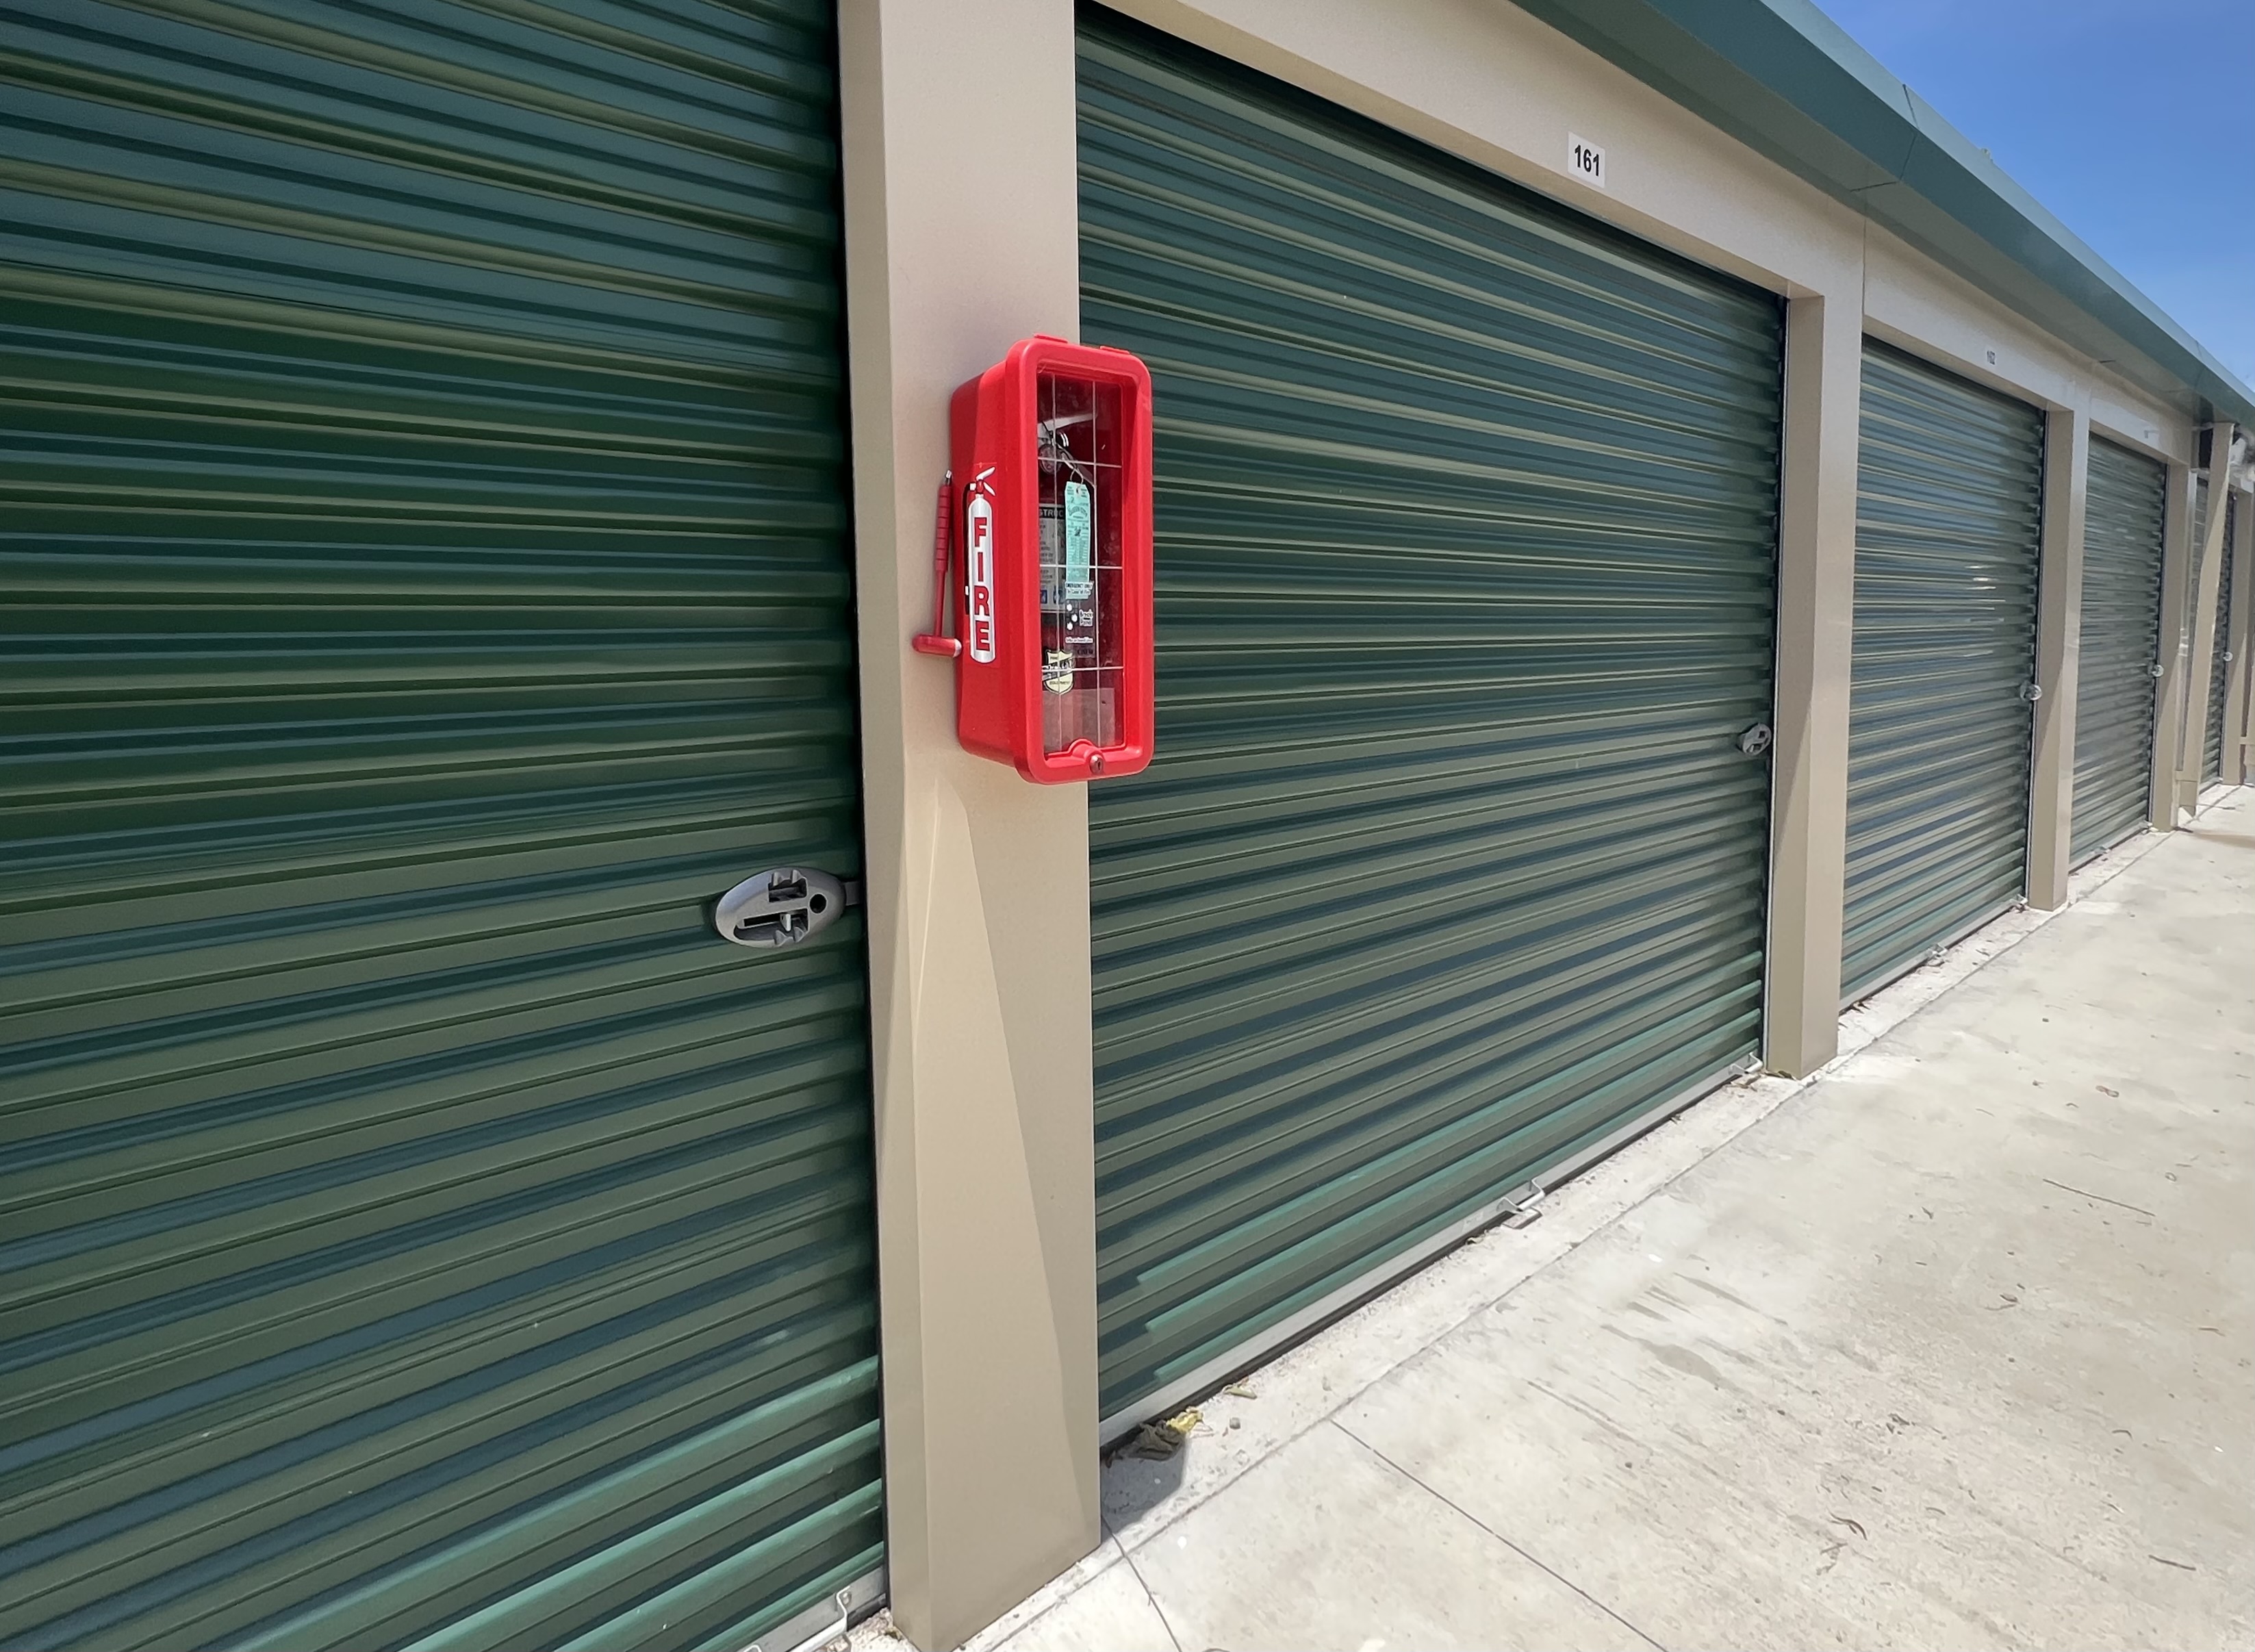 Trusted Choice Storage - Hermitage Rd